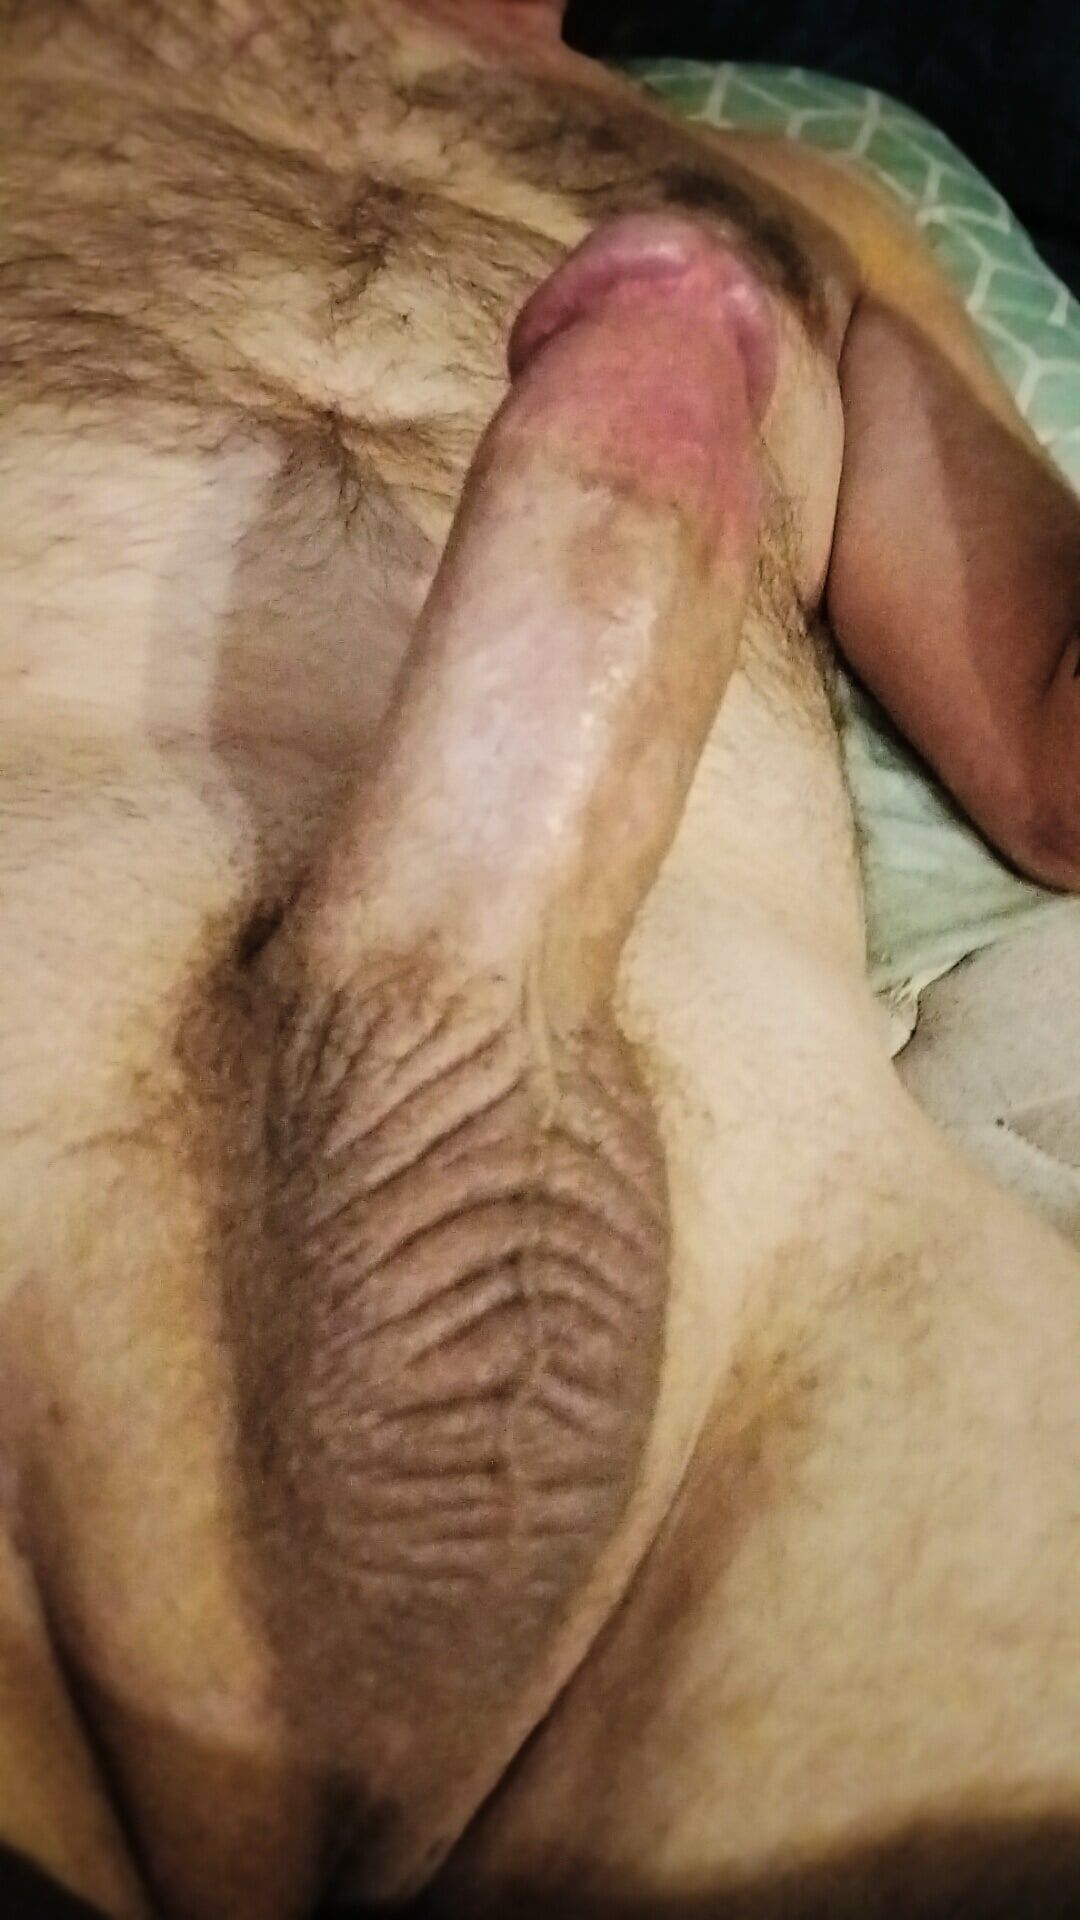 My spun self and I want any and all cocks! #18